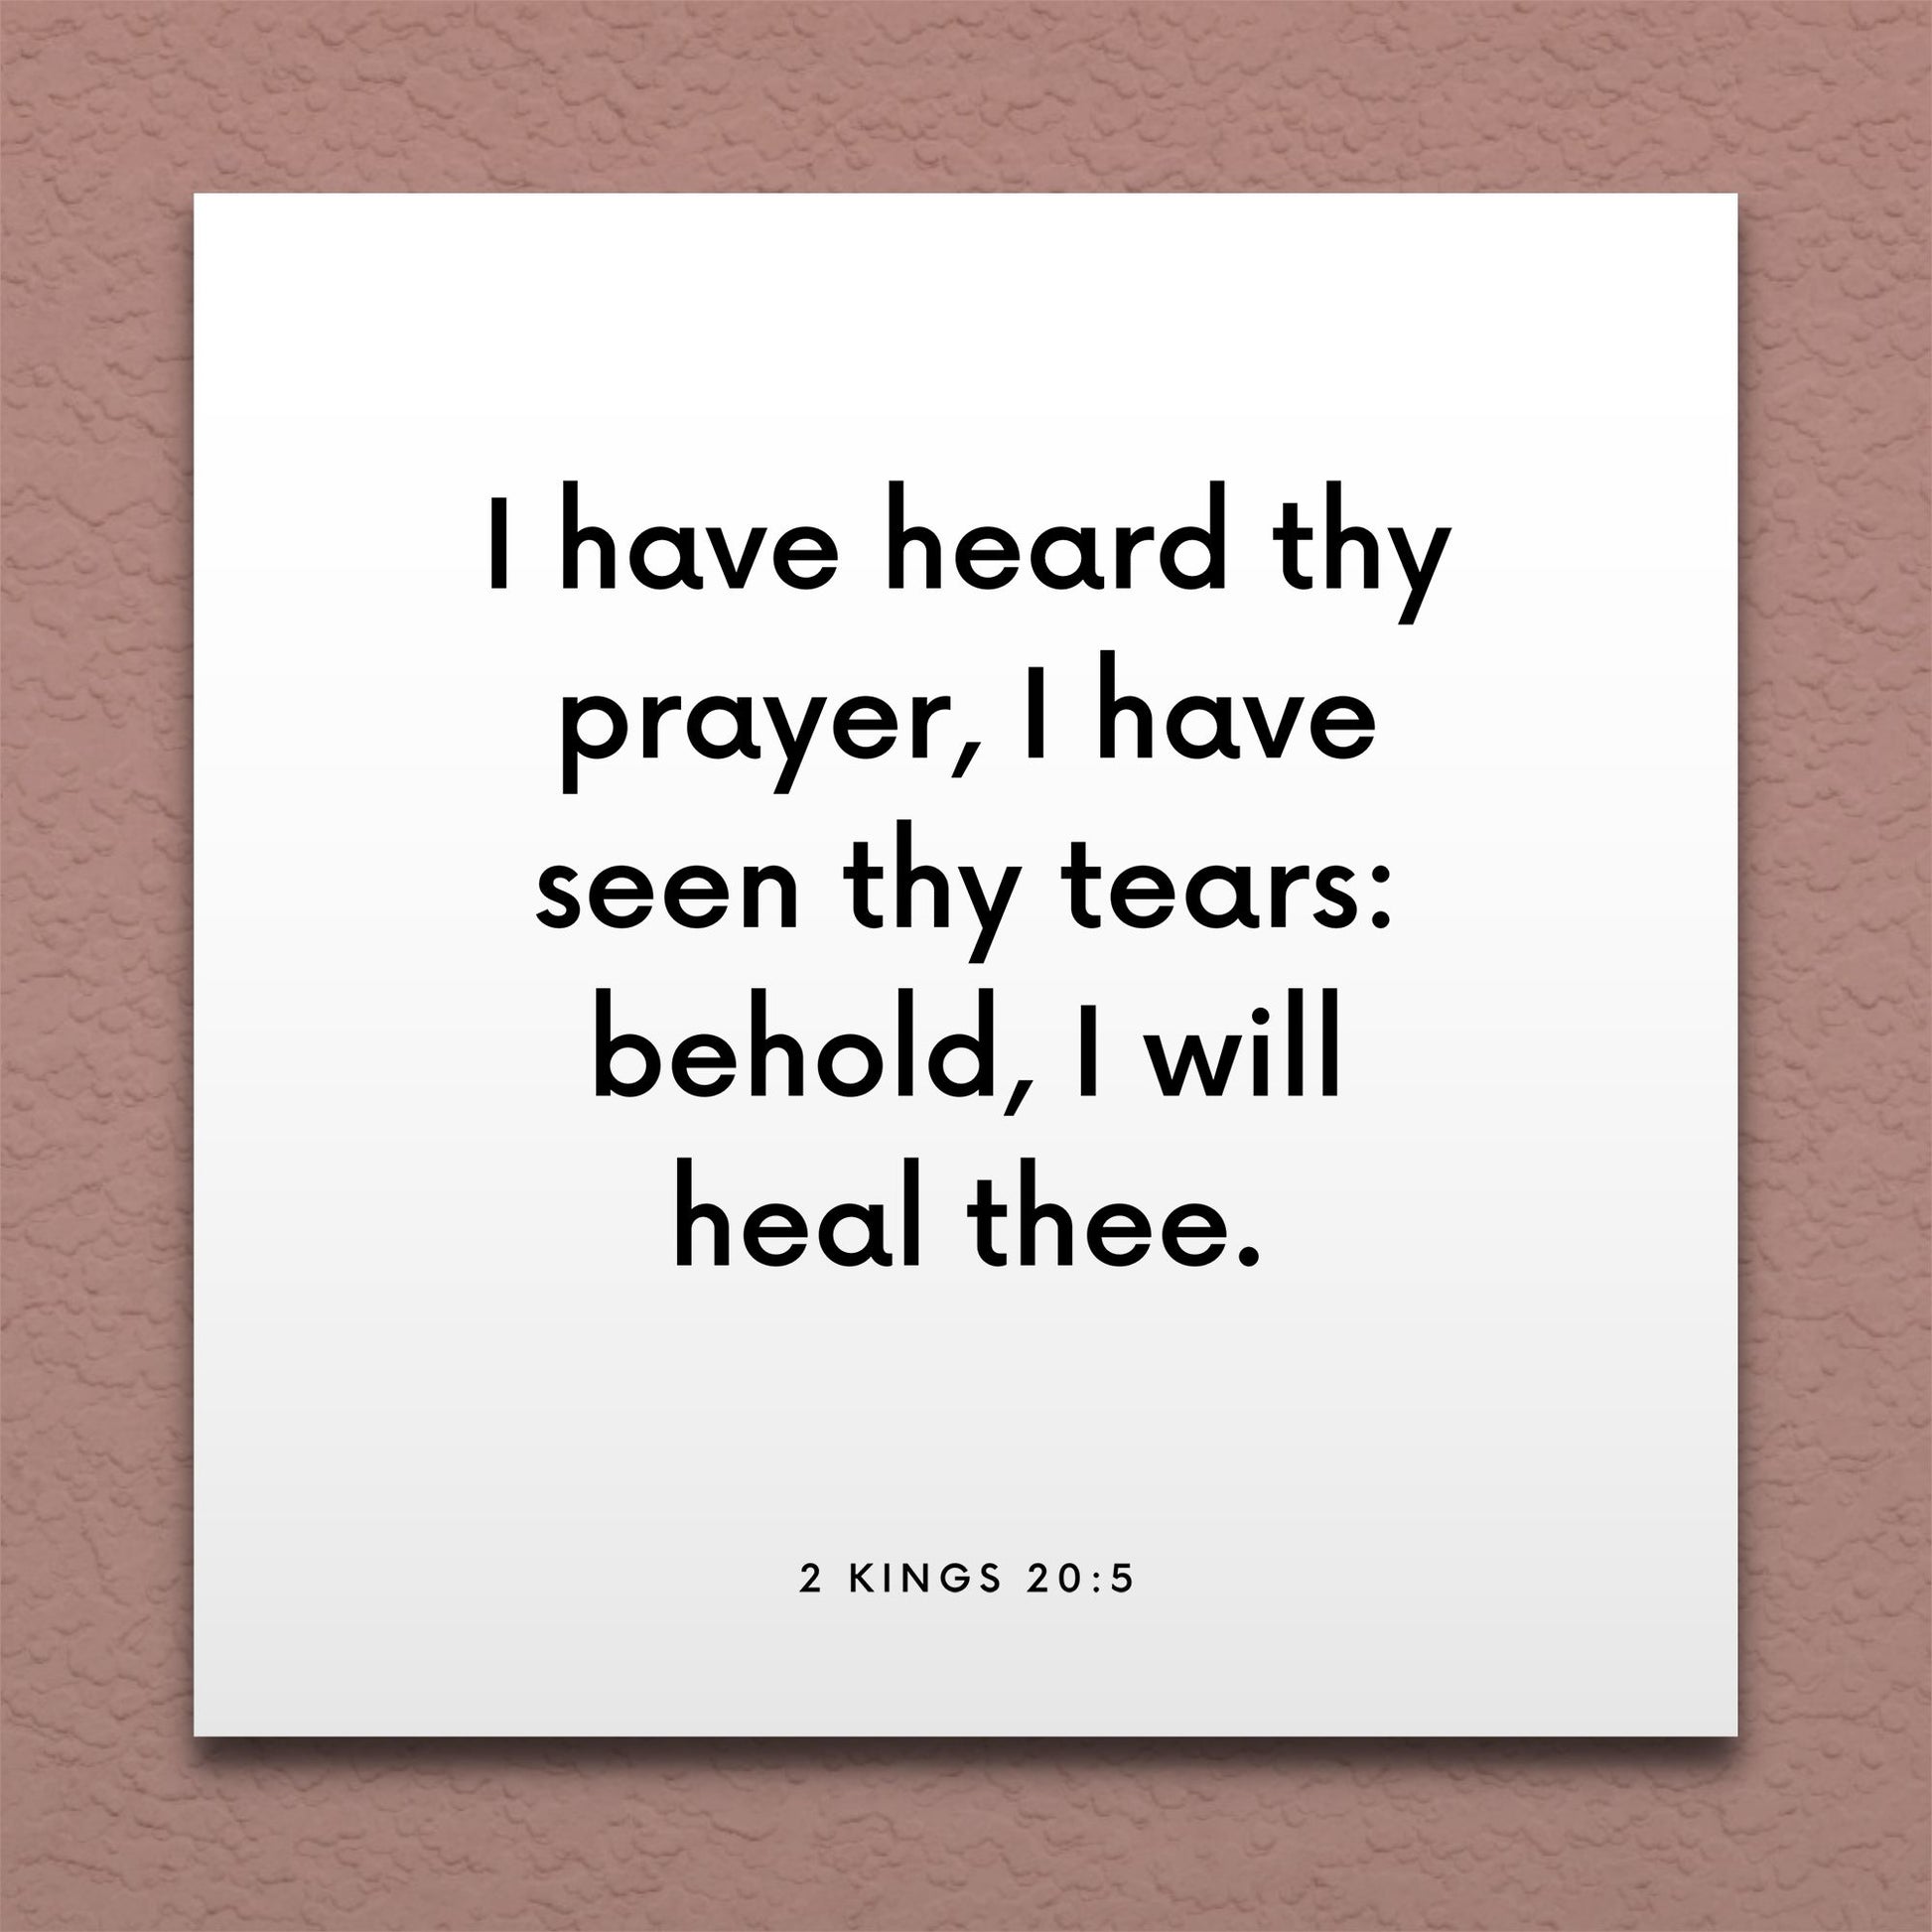 Wall-mounted scripture tile for 2 Kings 20:5 - "I have heard thy prayer, I have seen thy tears"